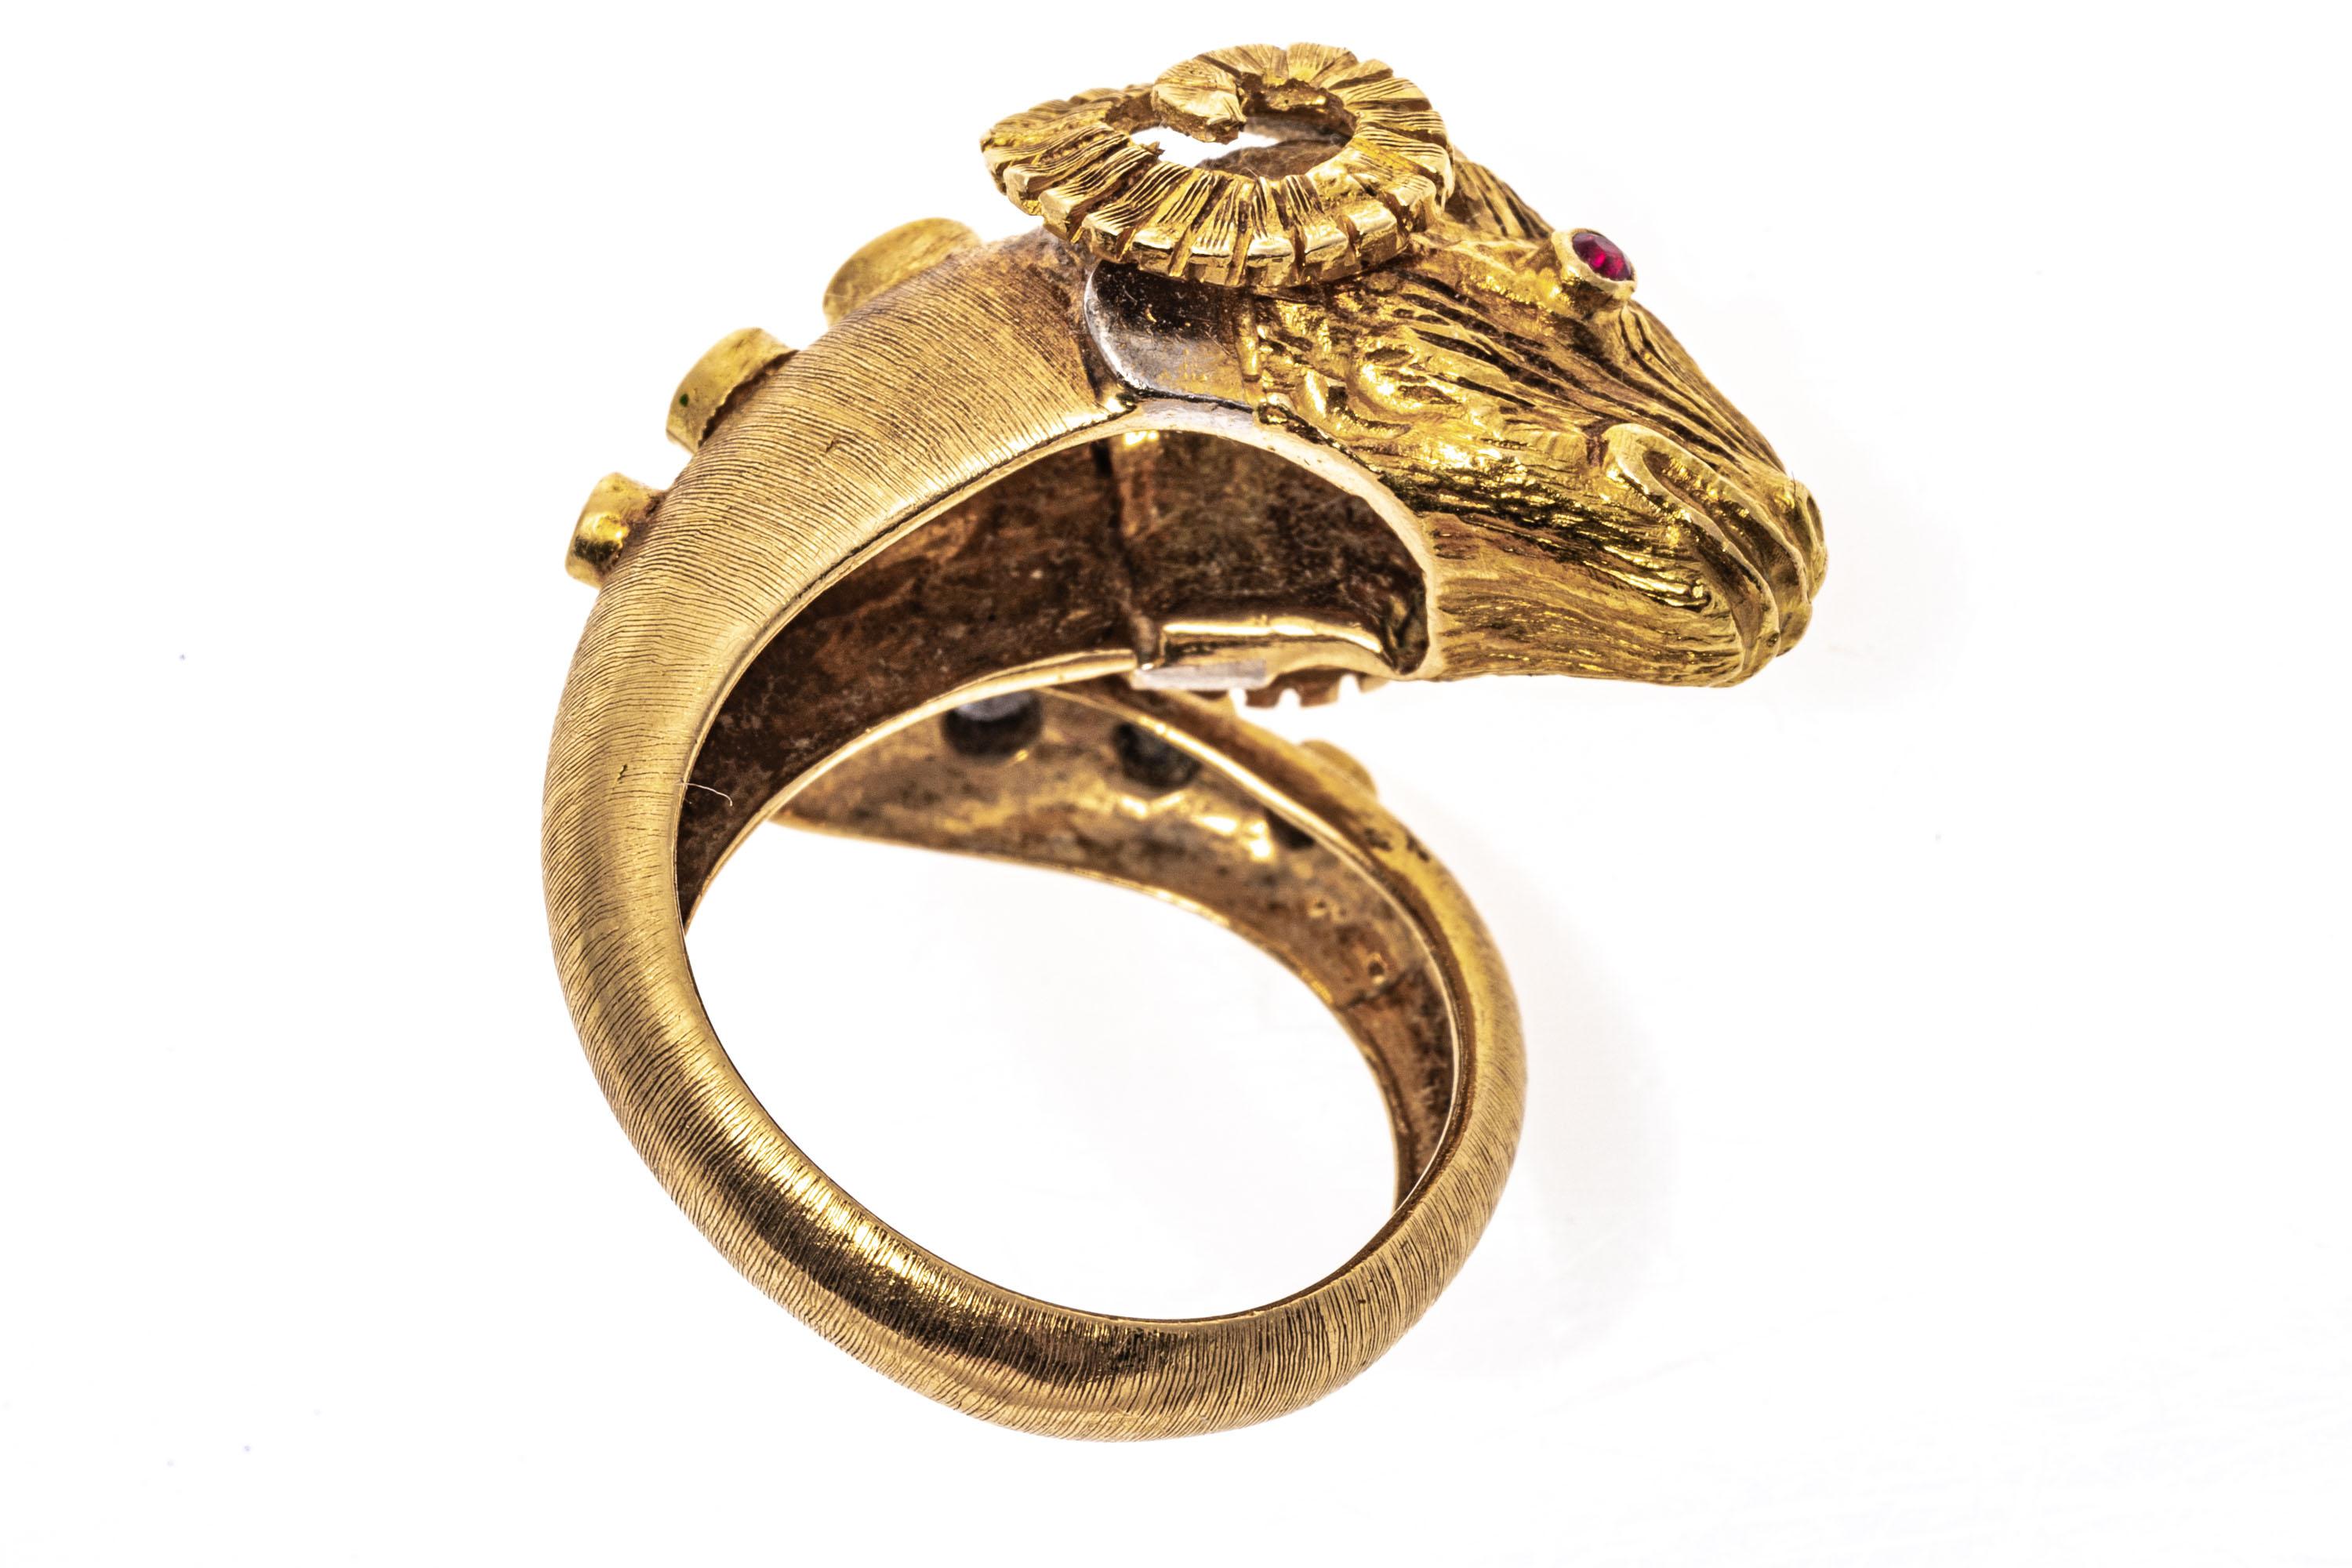 14k Yellow Gold Rams Head Ring With Sapphires, Rubies And Diamonds, Size 7-8 For Sale 3